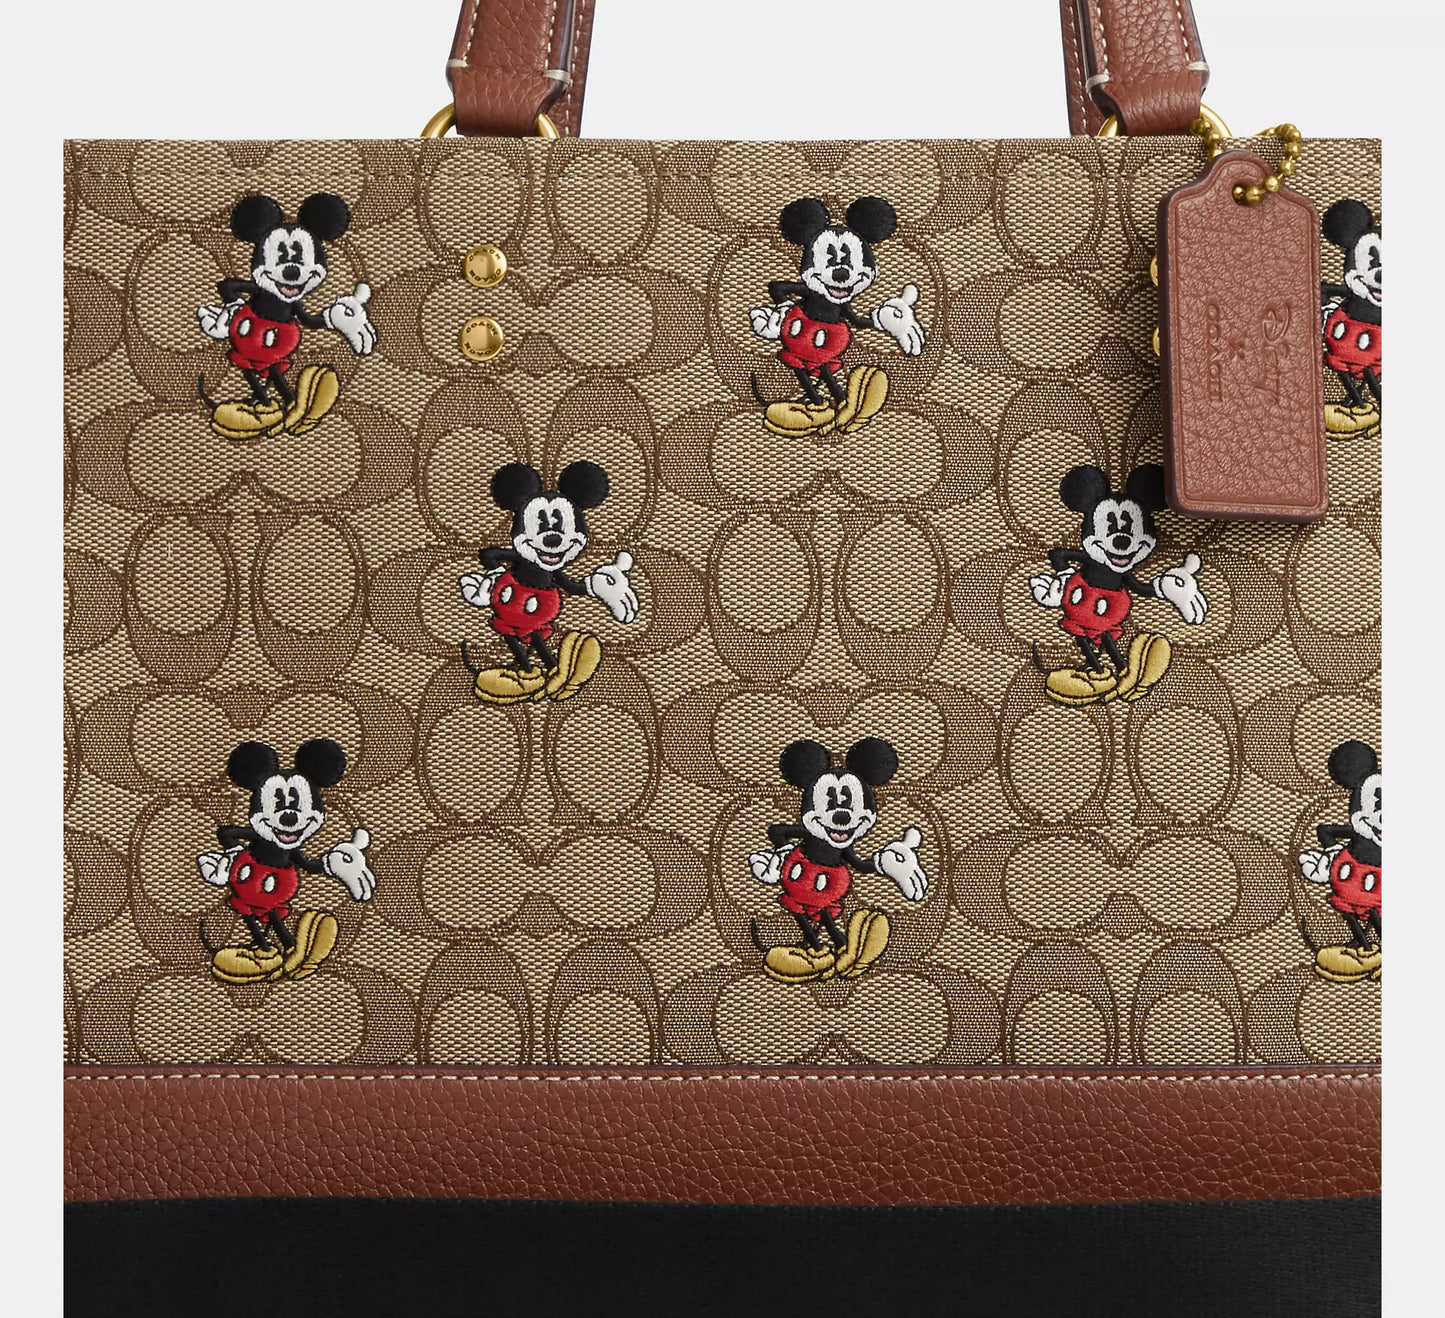 Disney X Coach Dempsey Carryall In Signature Jacquard With Mickey Mouse Print